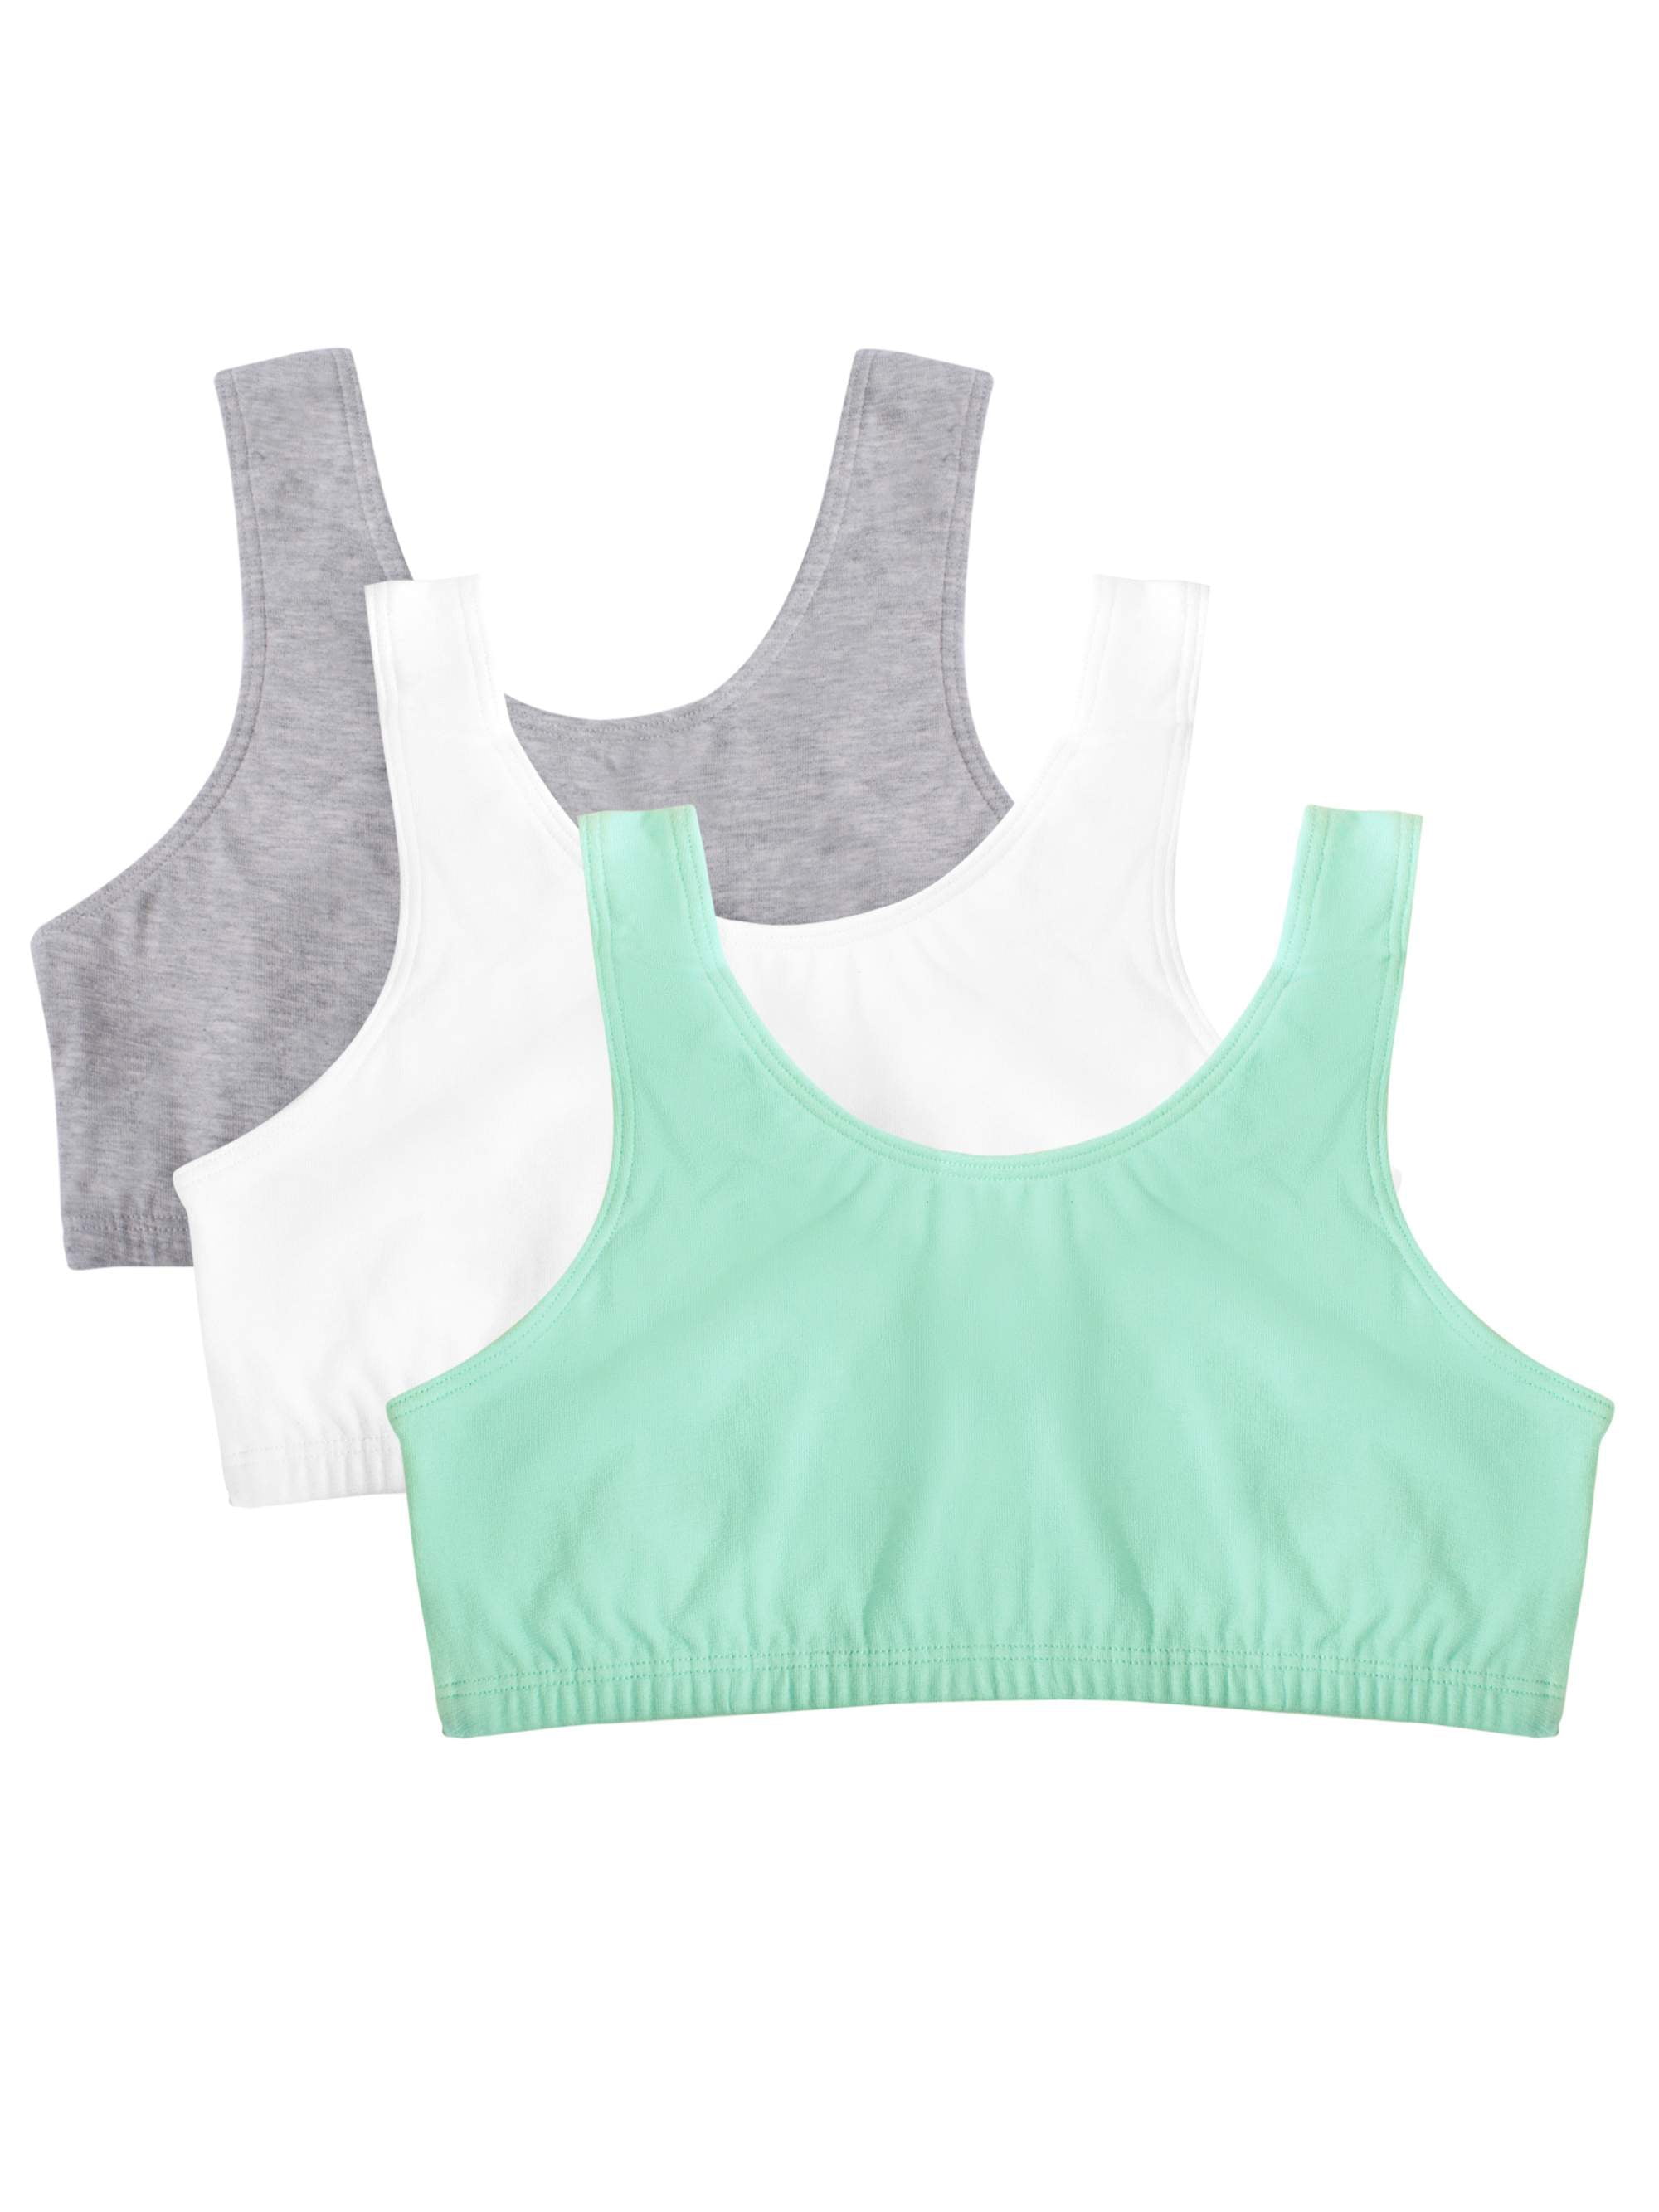 Fruit of the Loom Girls Pull Over Built Up Strap Cotton Sport Bra